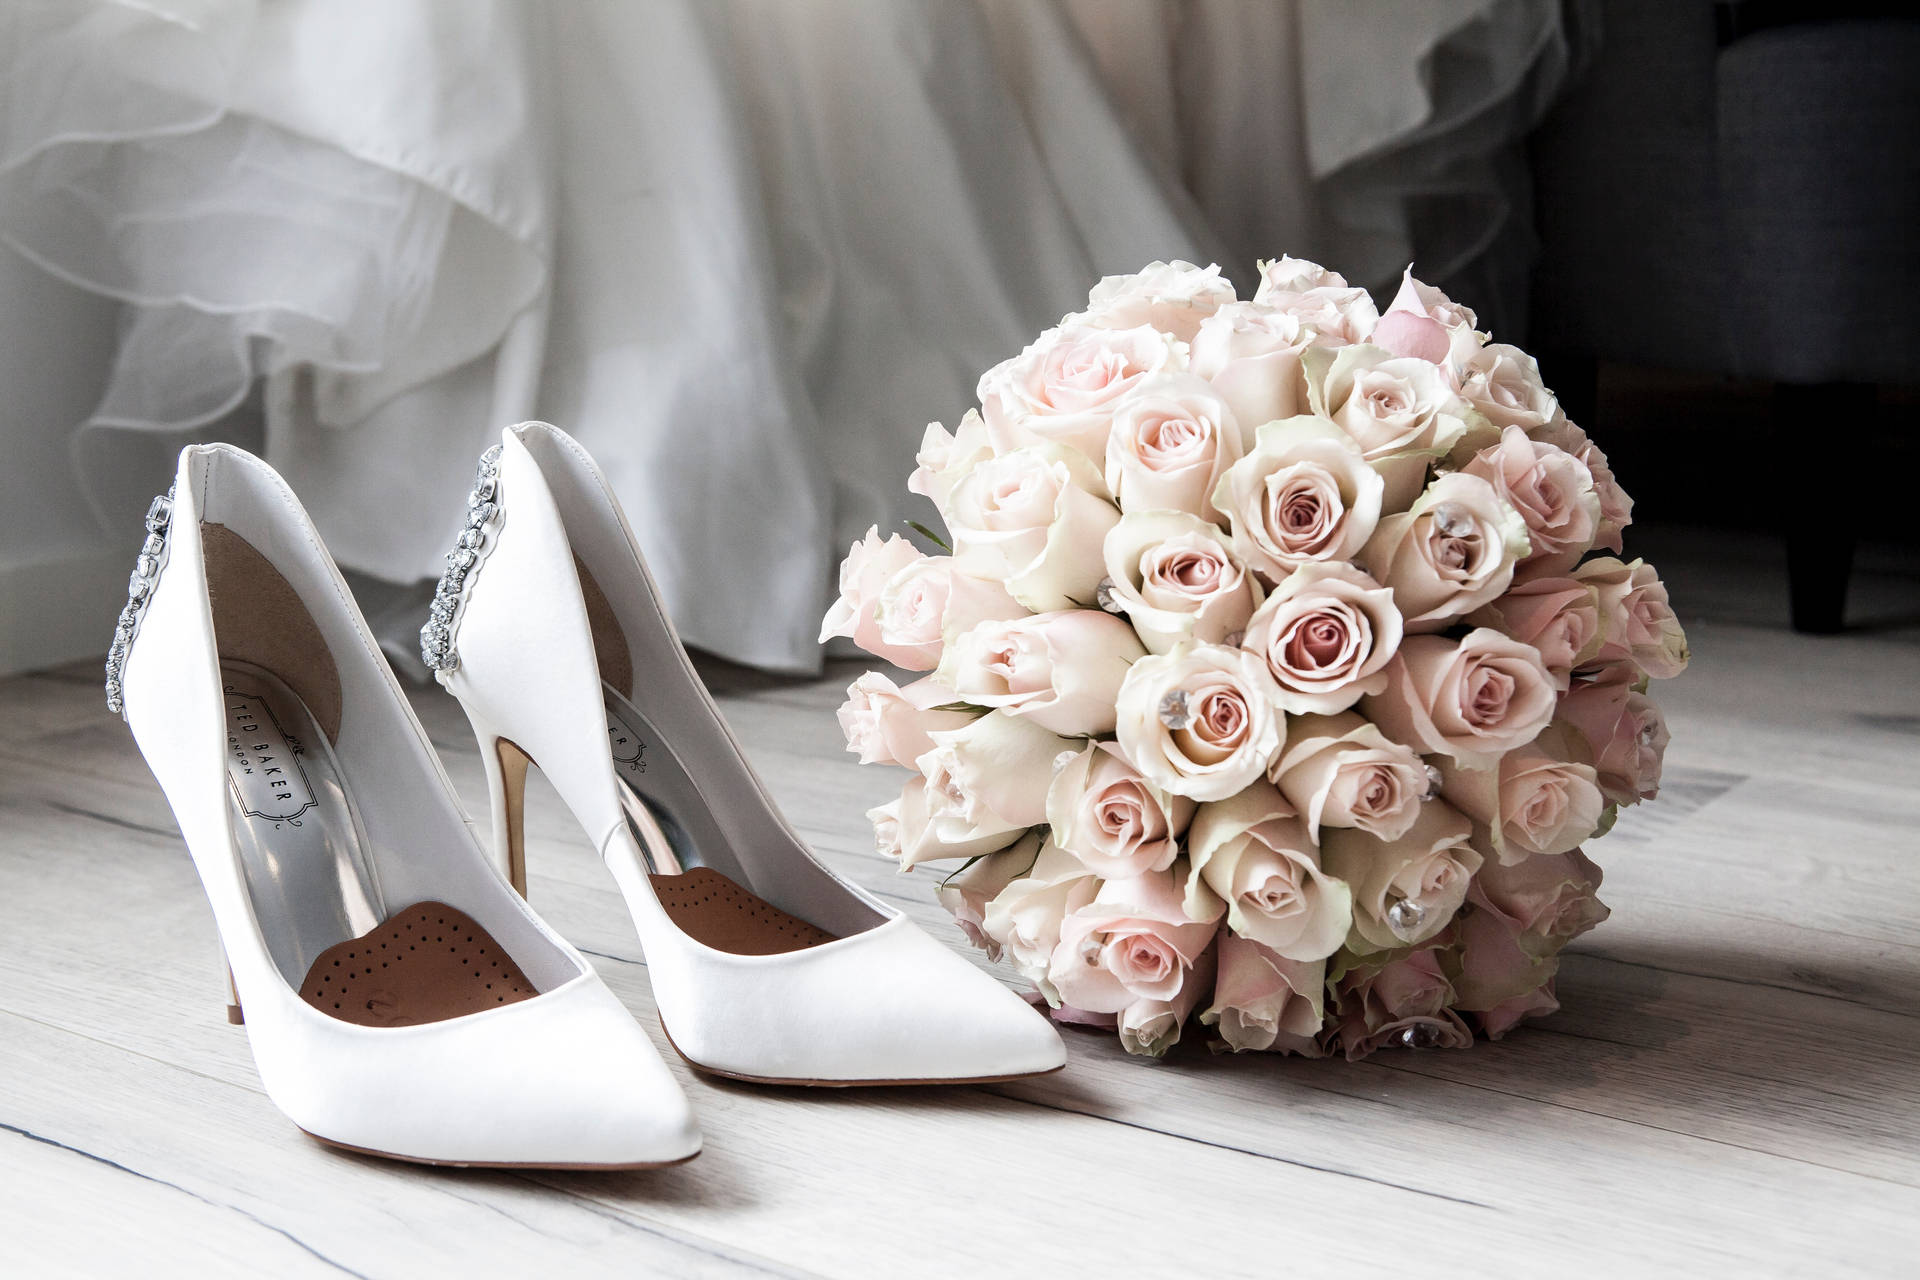 Wedding Bouquet And Shoes Background